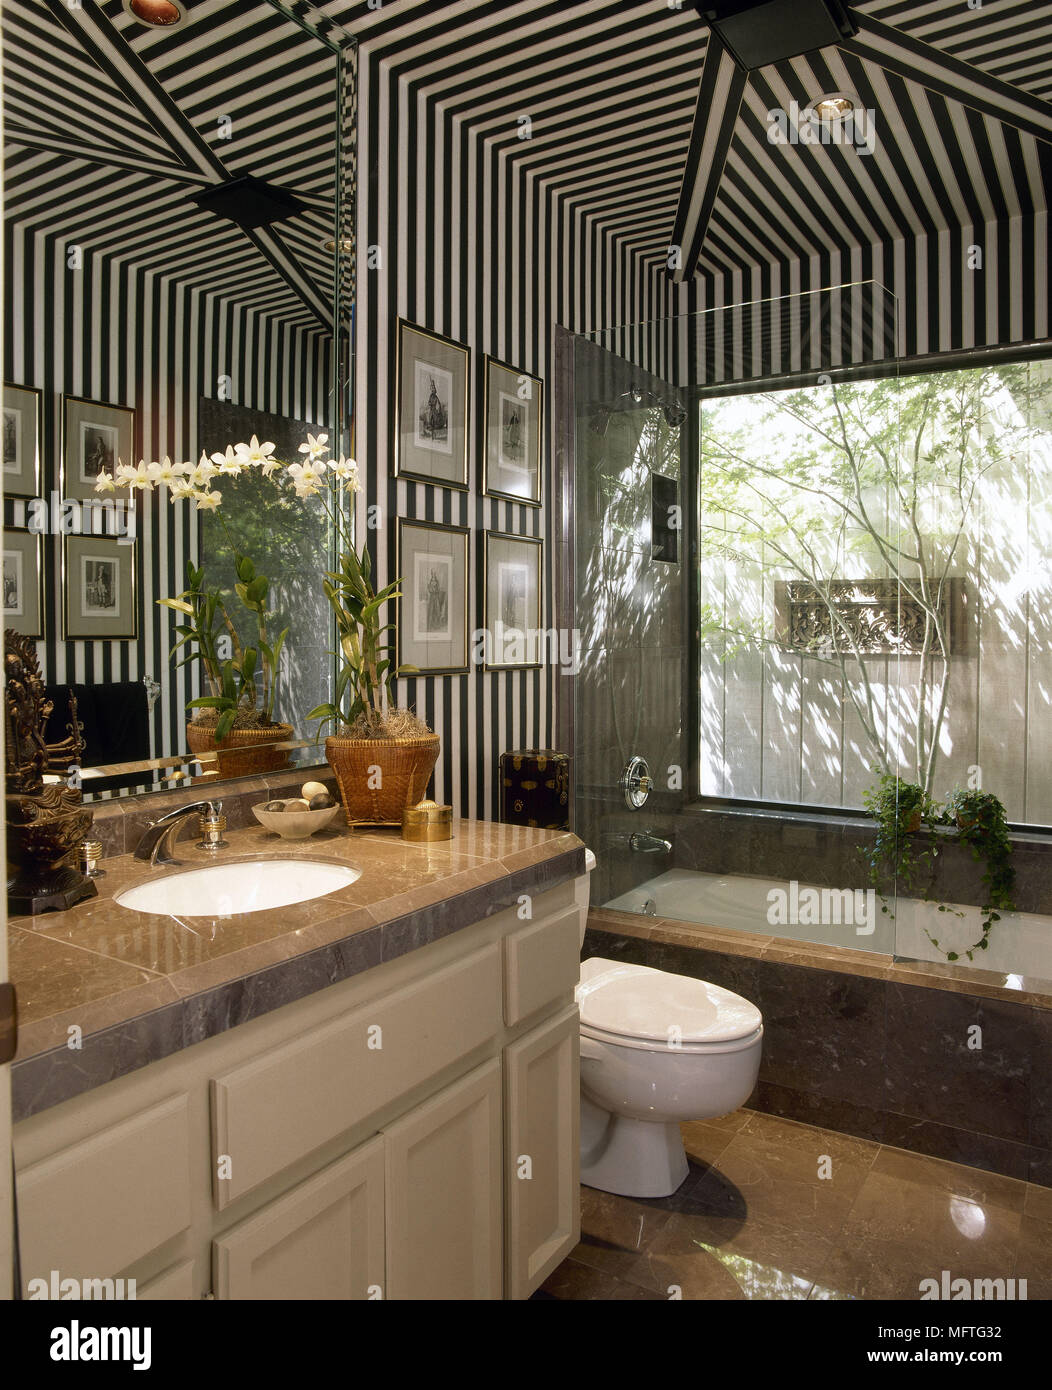 Bathroom with striped wallpaper and washbasin set in marble top unit USA Stock Photo